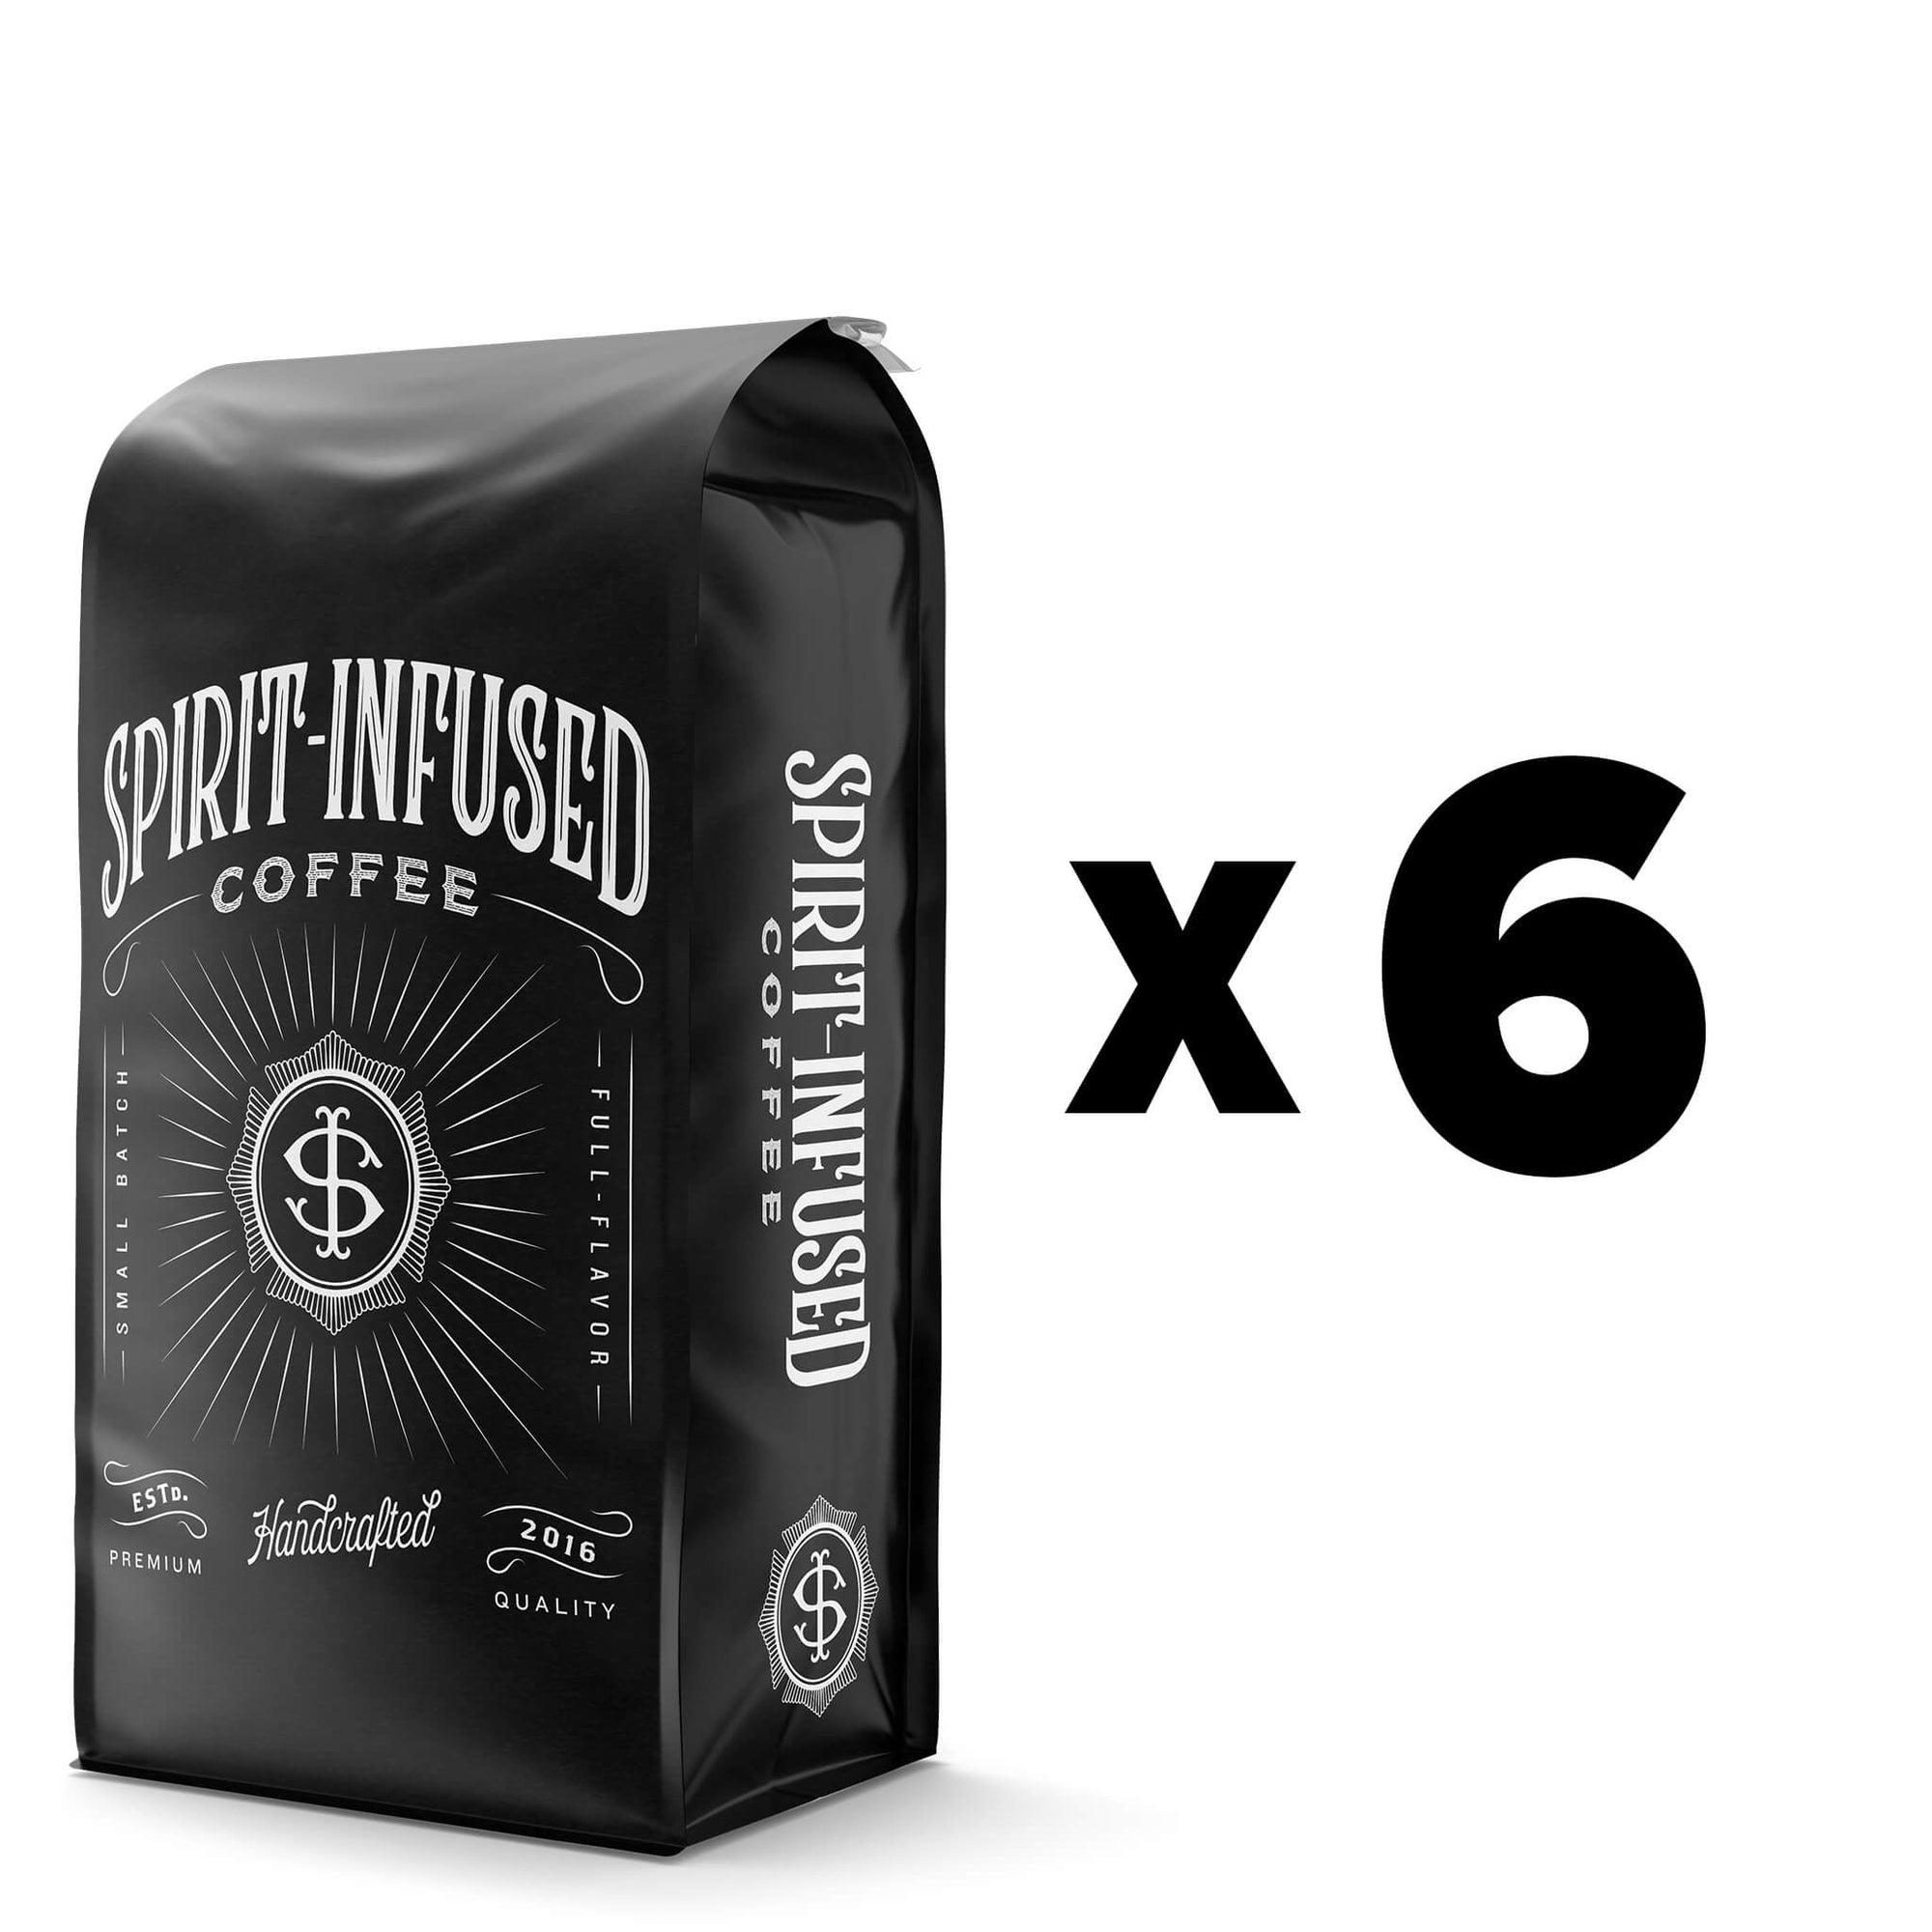 SPIRIT INFUSED COFFEE CLUB GROUND - 6 MONTH PREPAID SUBSCRIPTION